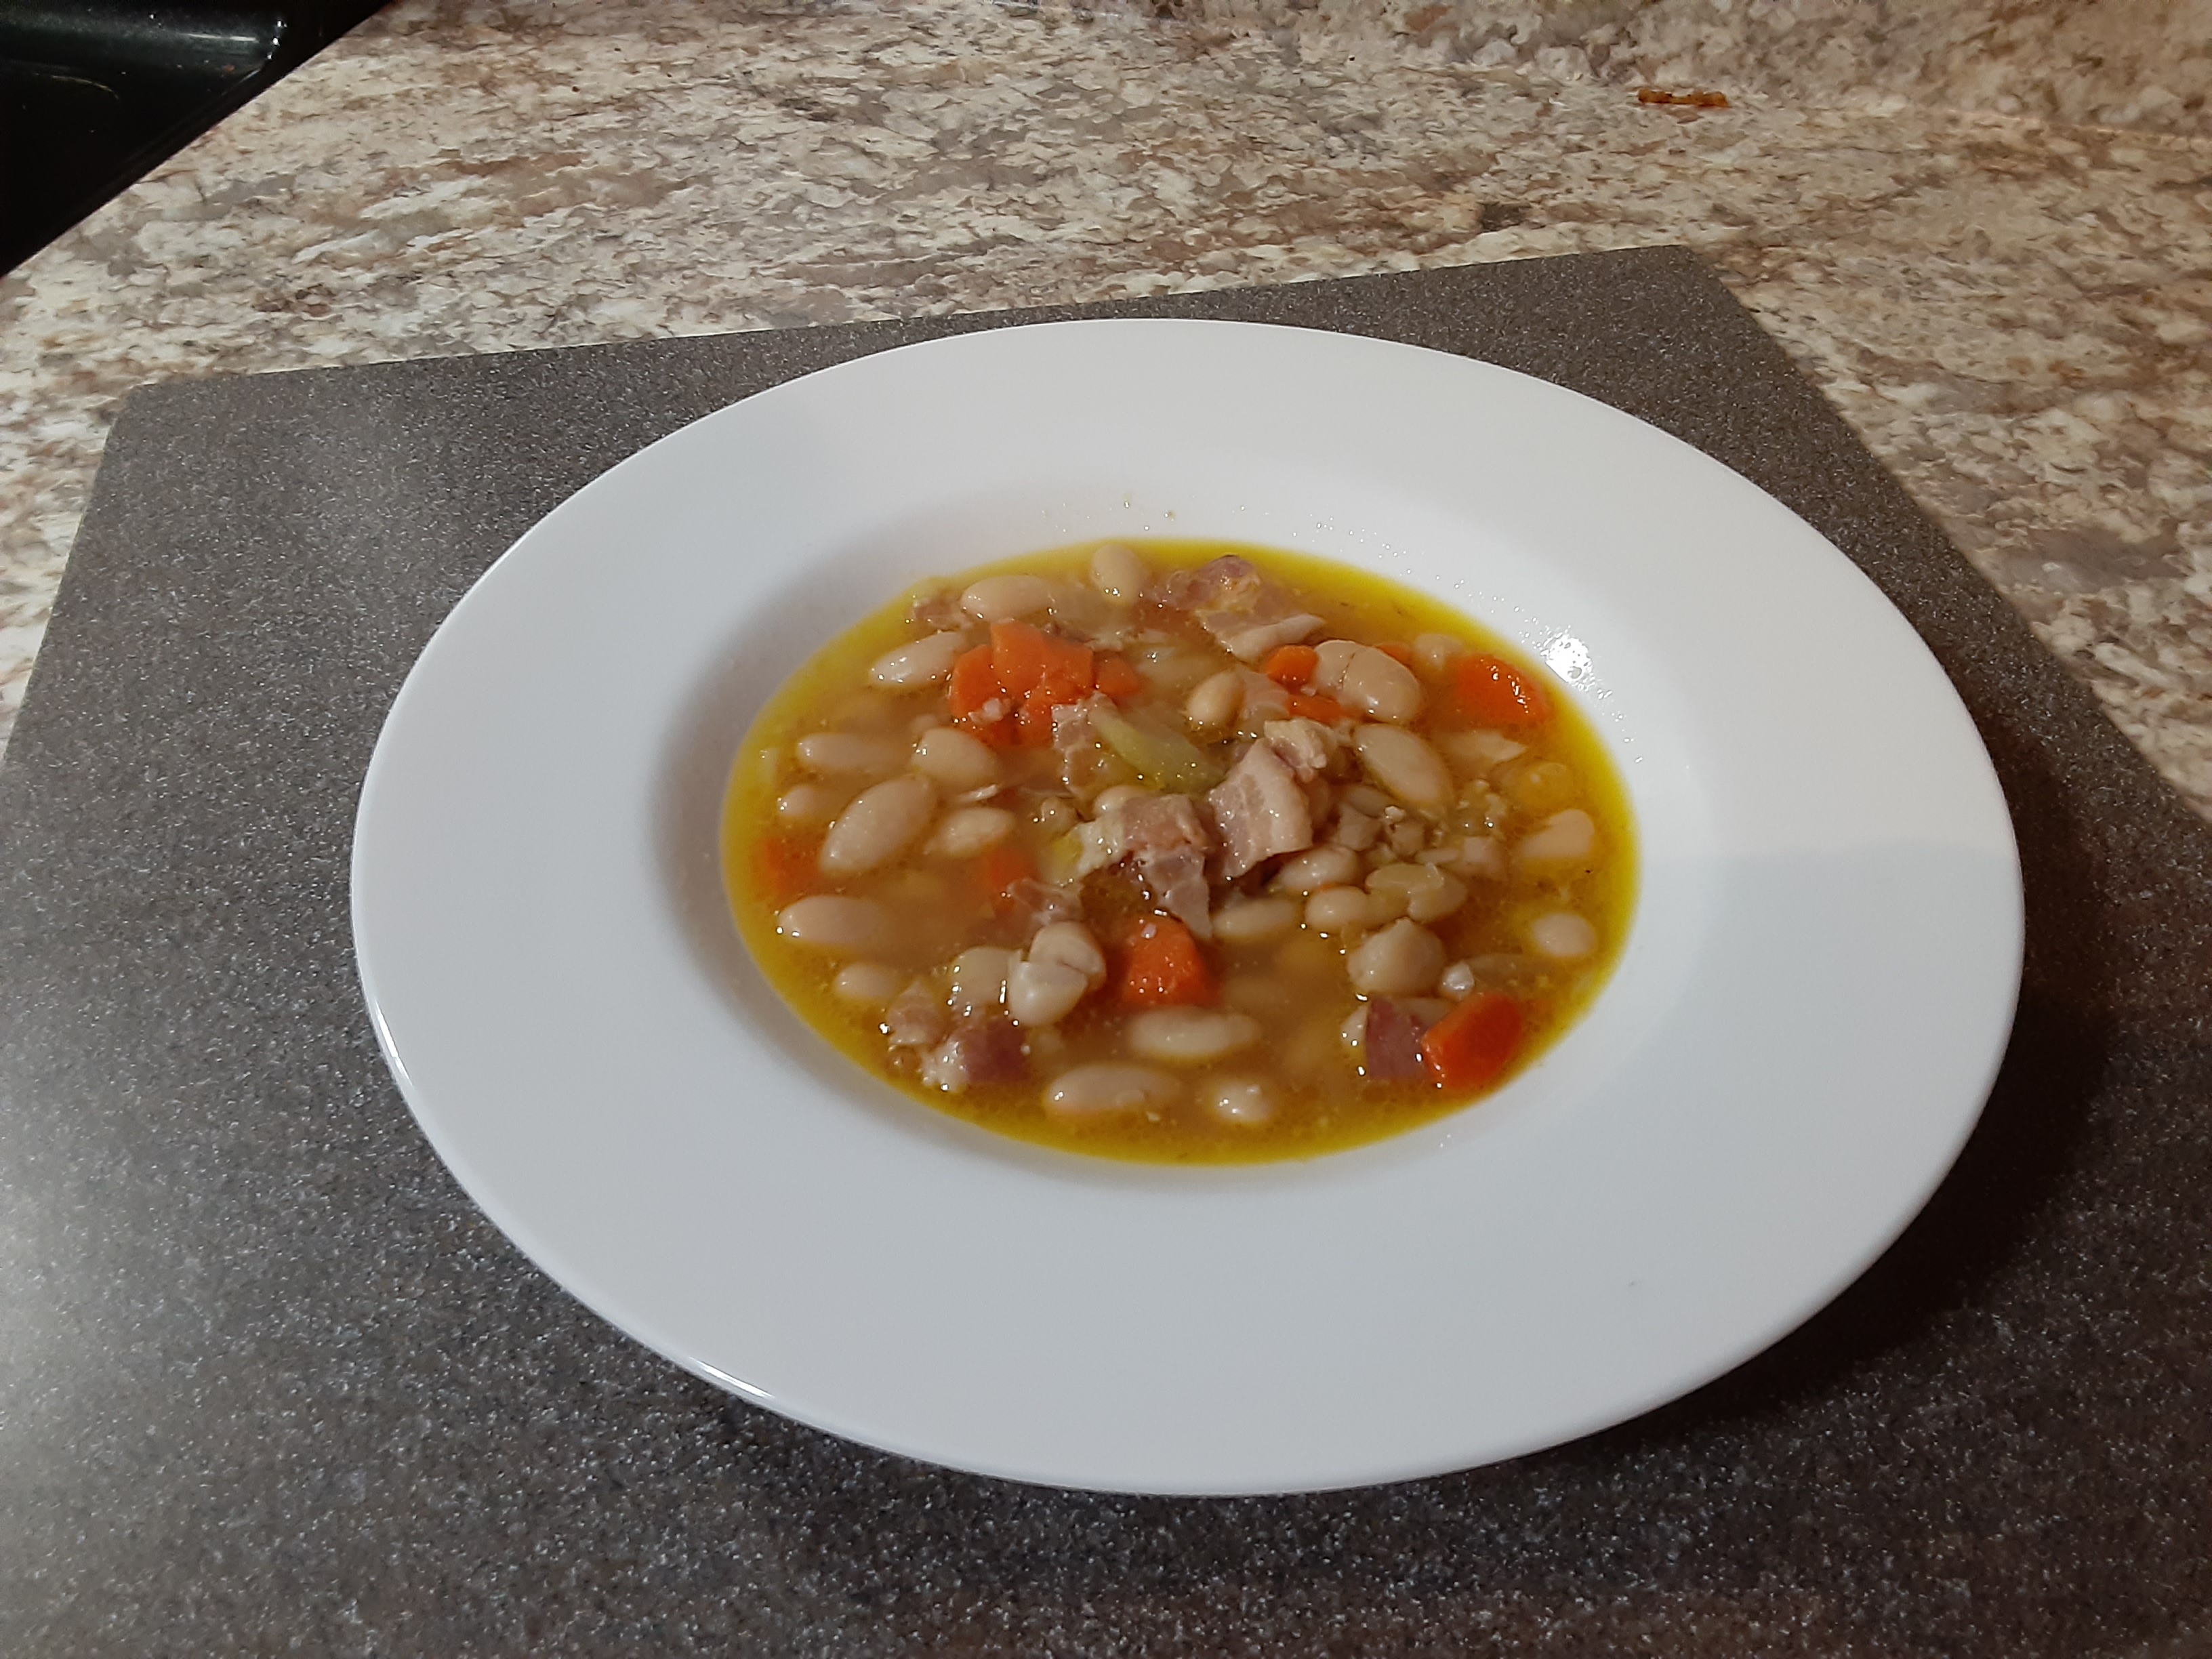 Bean and Bacon Soup Recipe – On the stove in hours